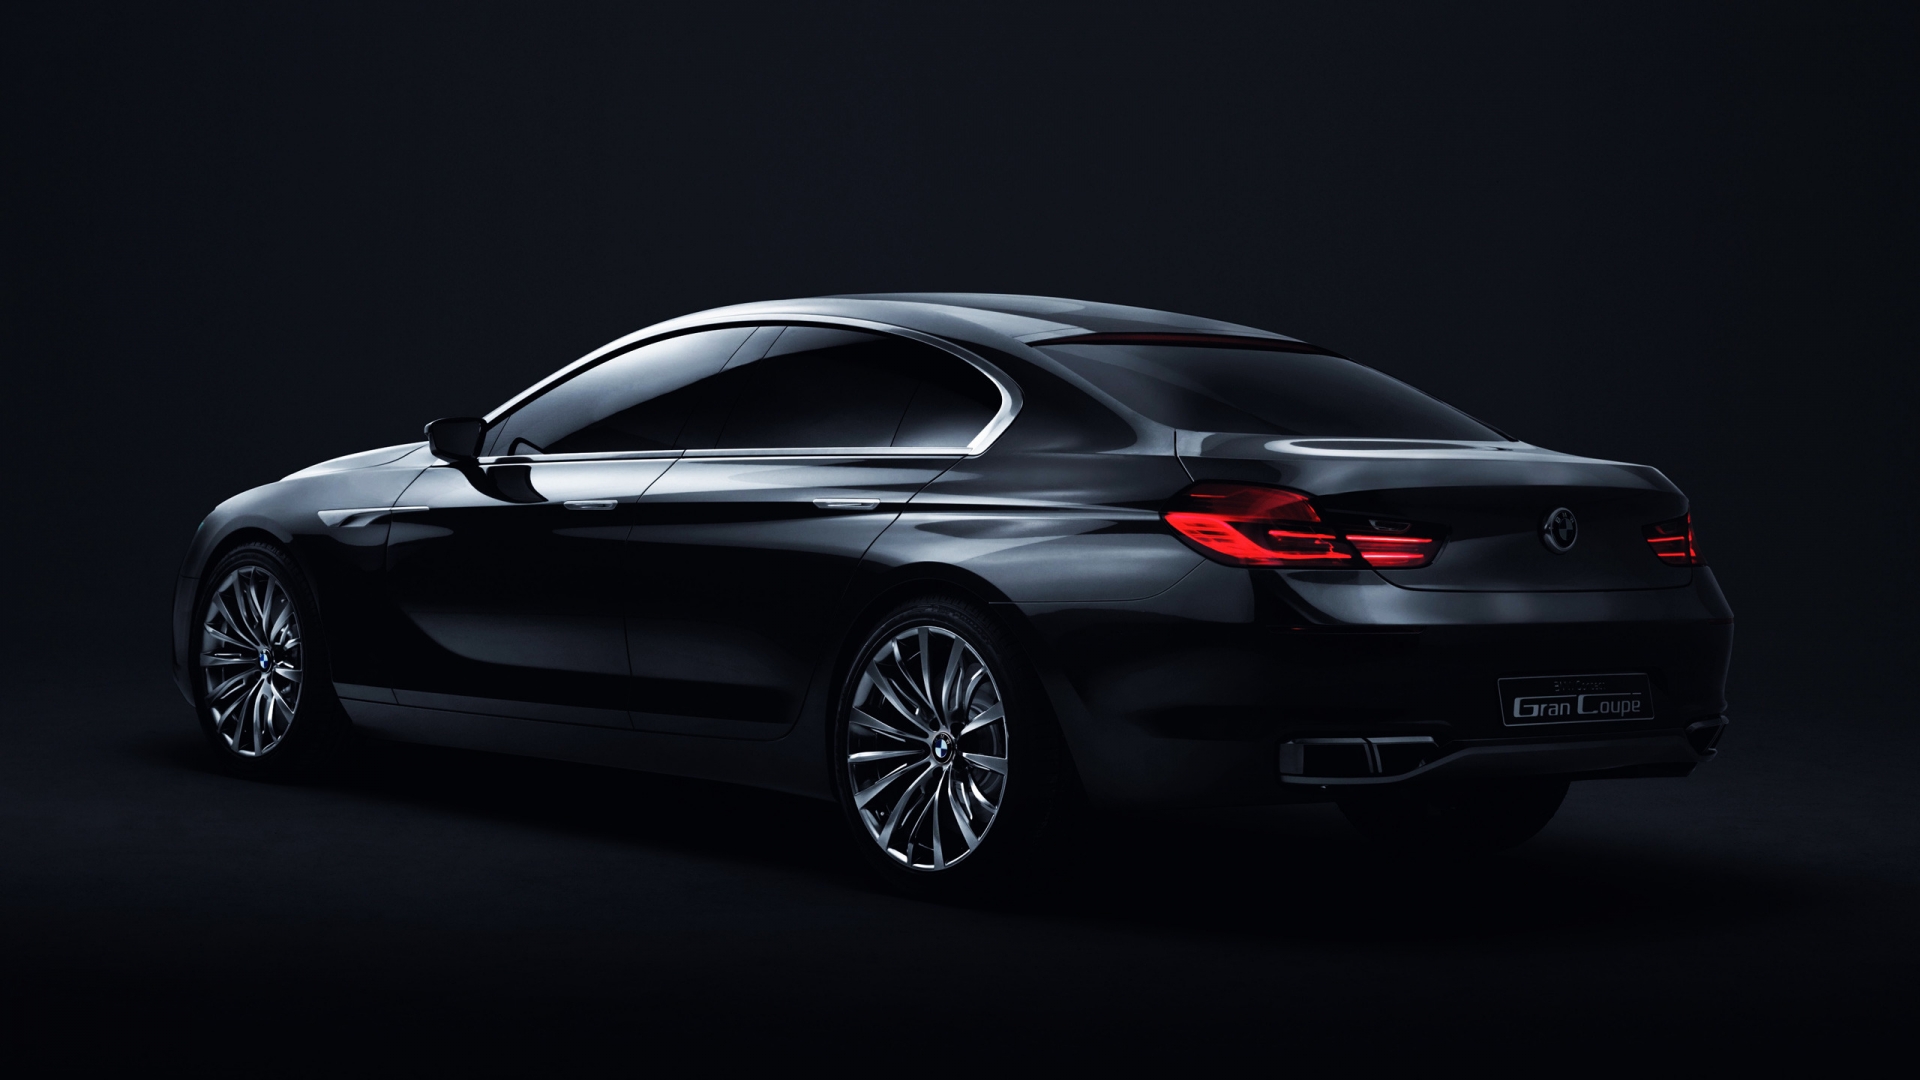 BMW Gran Coupe Rear for 1920 x 1080 HDTV 1080p resolution